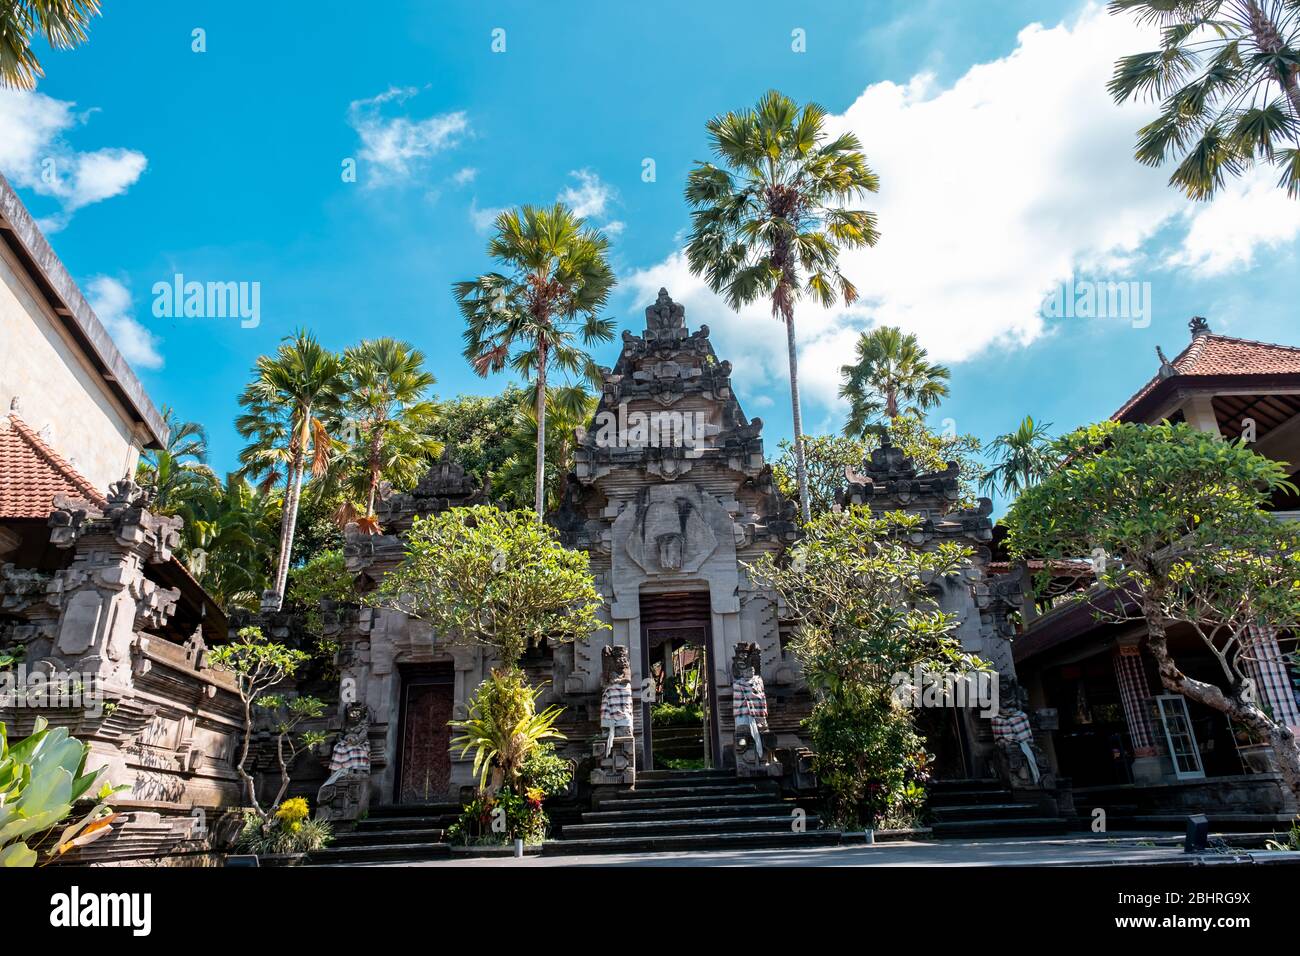 Local name of this place 'Museum Puri Lukisan' Puri Lukisan is in center of the Ubud Province, Bali Island Stock Photo